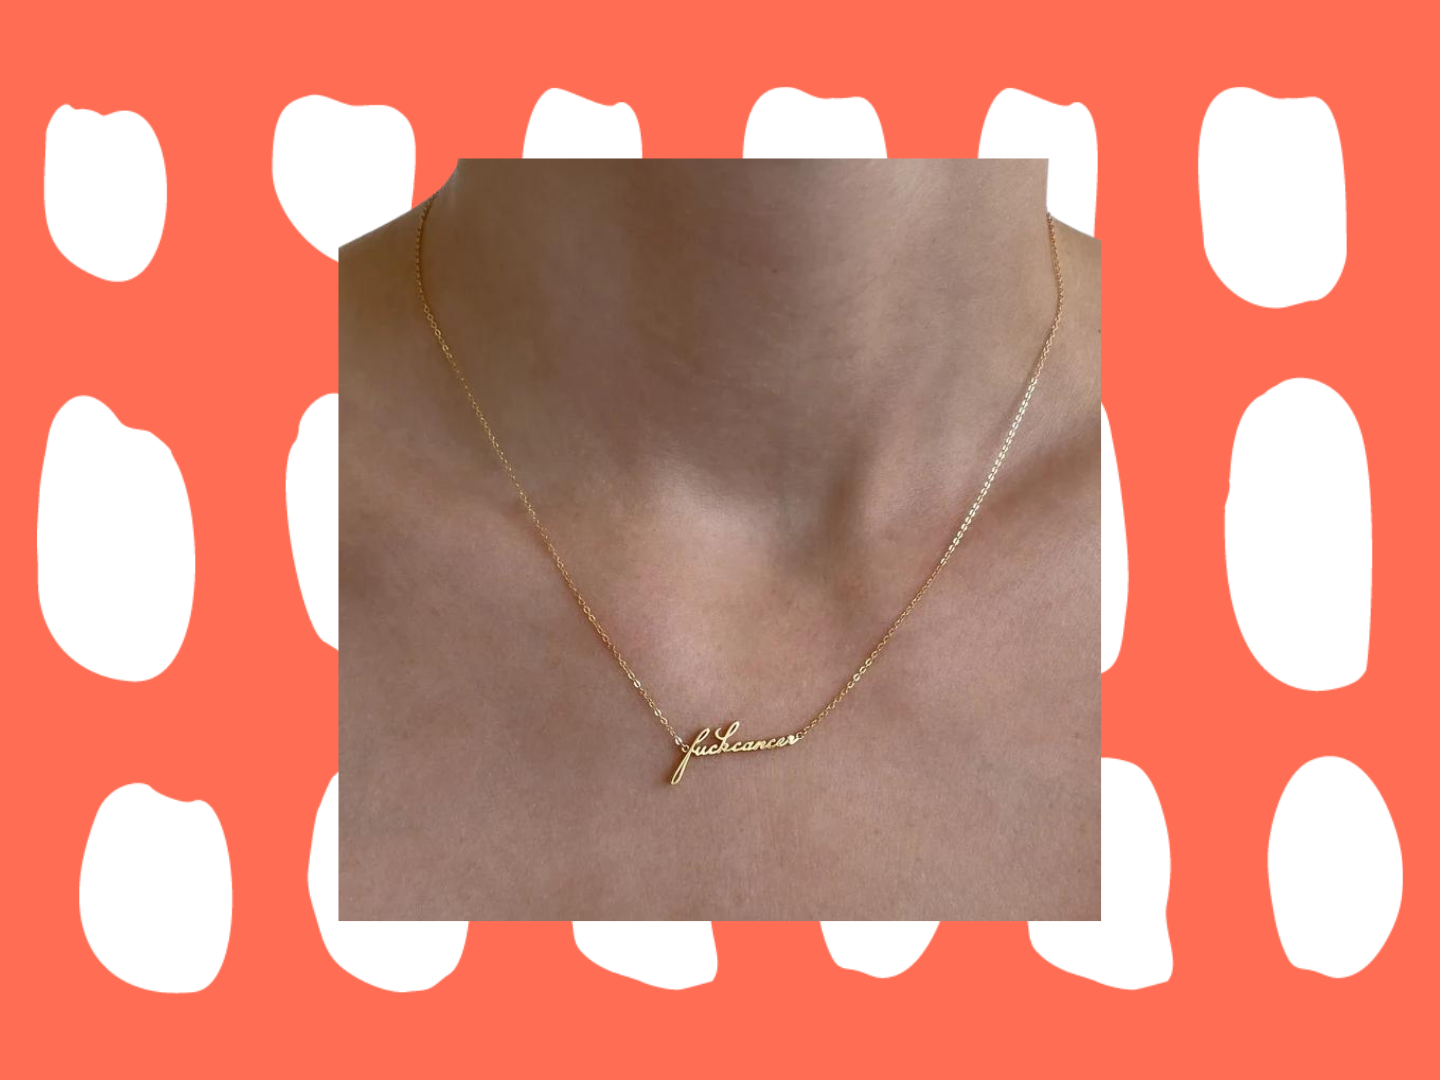 A gold chain necklace around a necklace that reads "fuck cancer" in cursive.